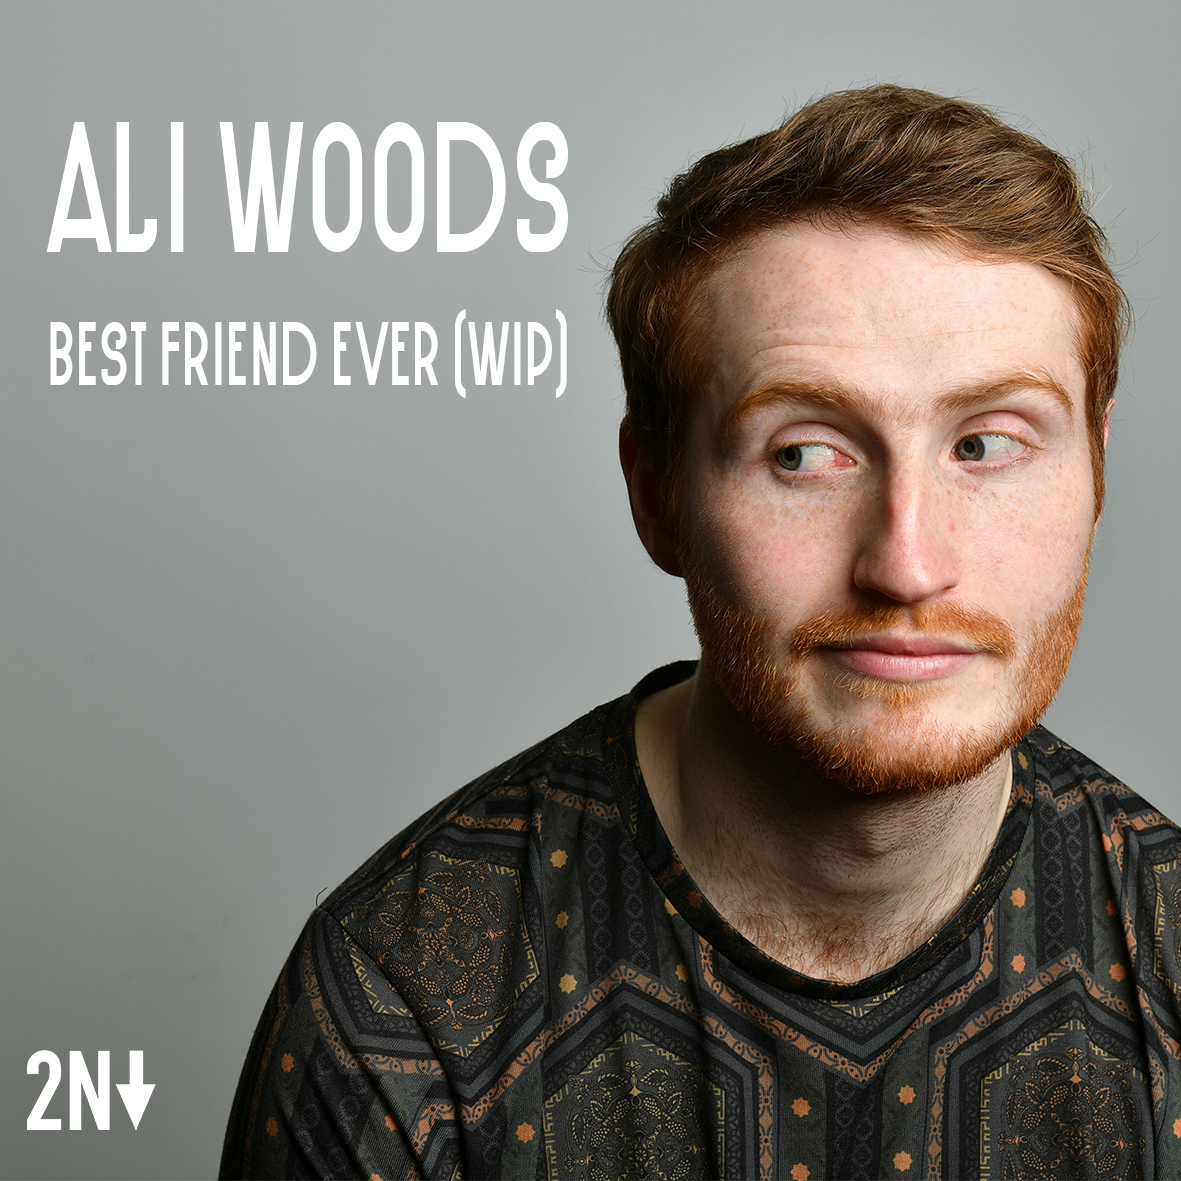 ALI WOODS: BEST FRIEND EVER (WIP) Woods is an exciting new stand-up comedian on the UK circuit, having won Hackney Empire New Act of the Year 2020 & will be working on his debut stand-up comedy show THURSDAY 30TH JUNE 7PM 🎟️bit.ly/3O8aAle